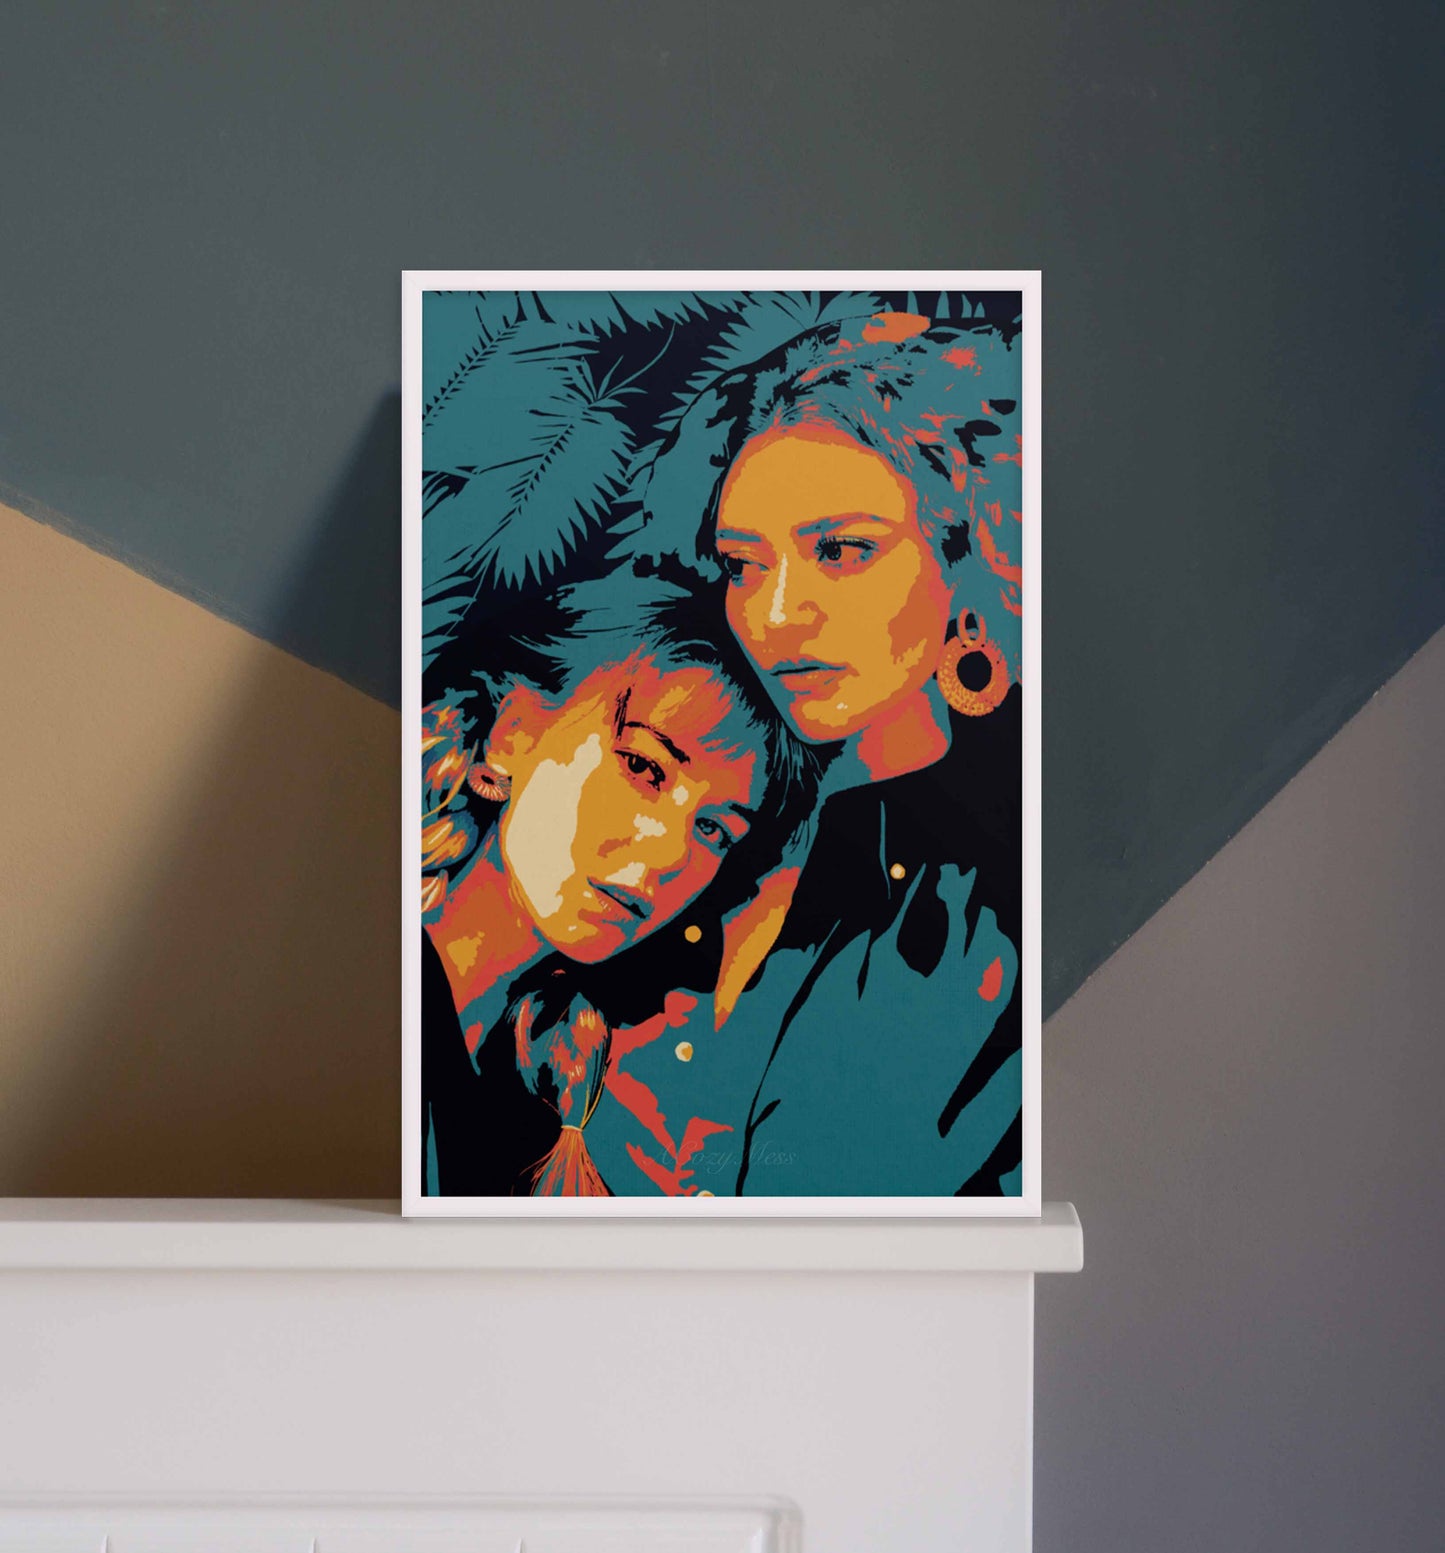  Two women abstract wall art poster in yellow, blue, orange & black colors showcasing sisterhood in white frame